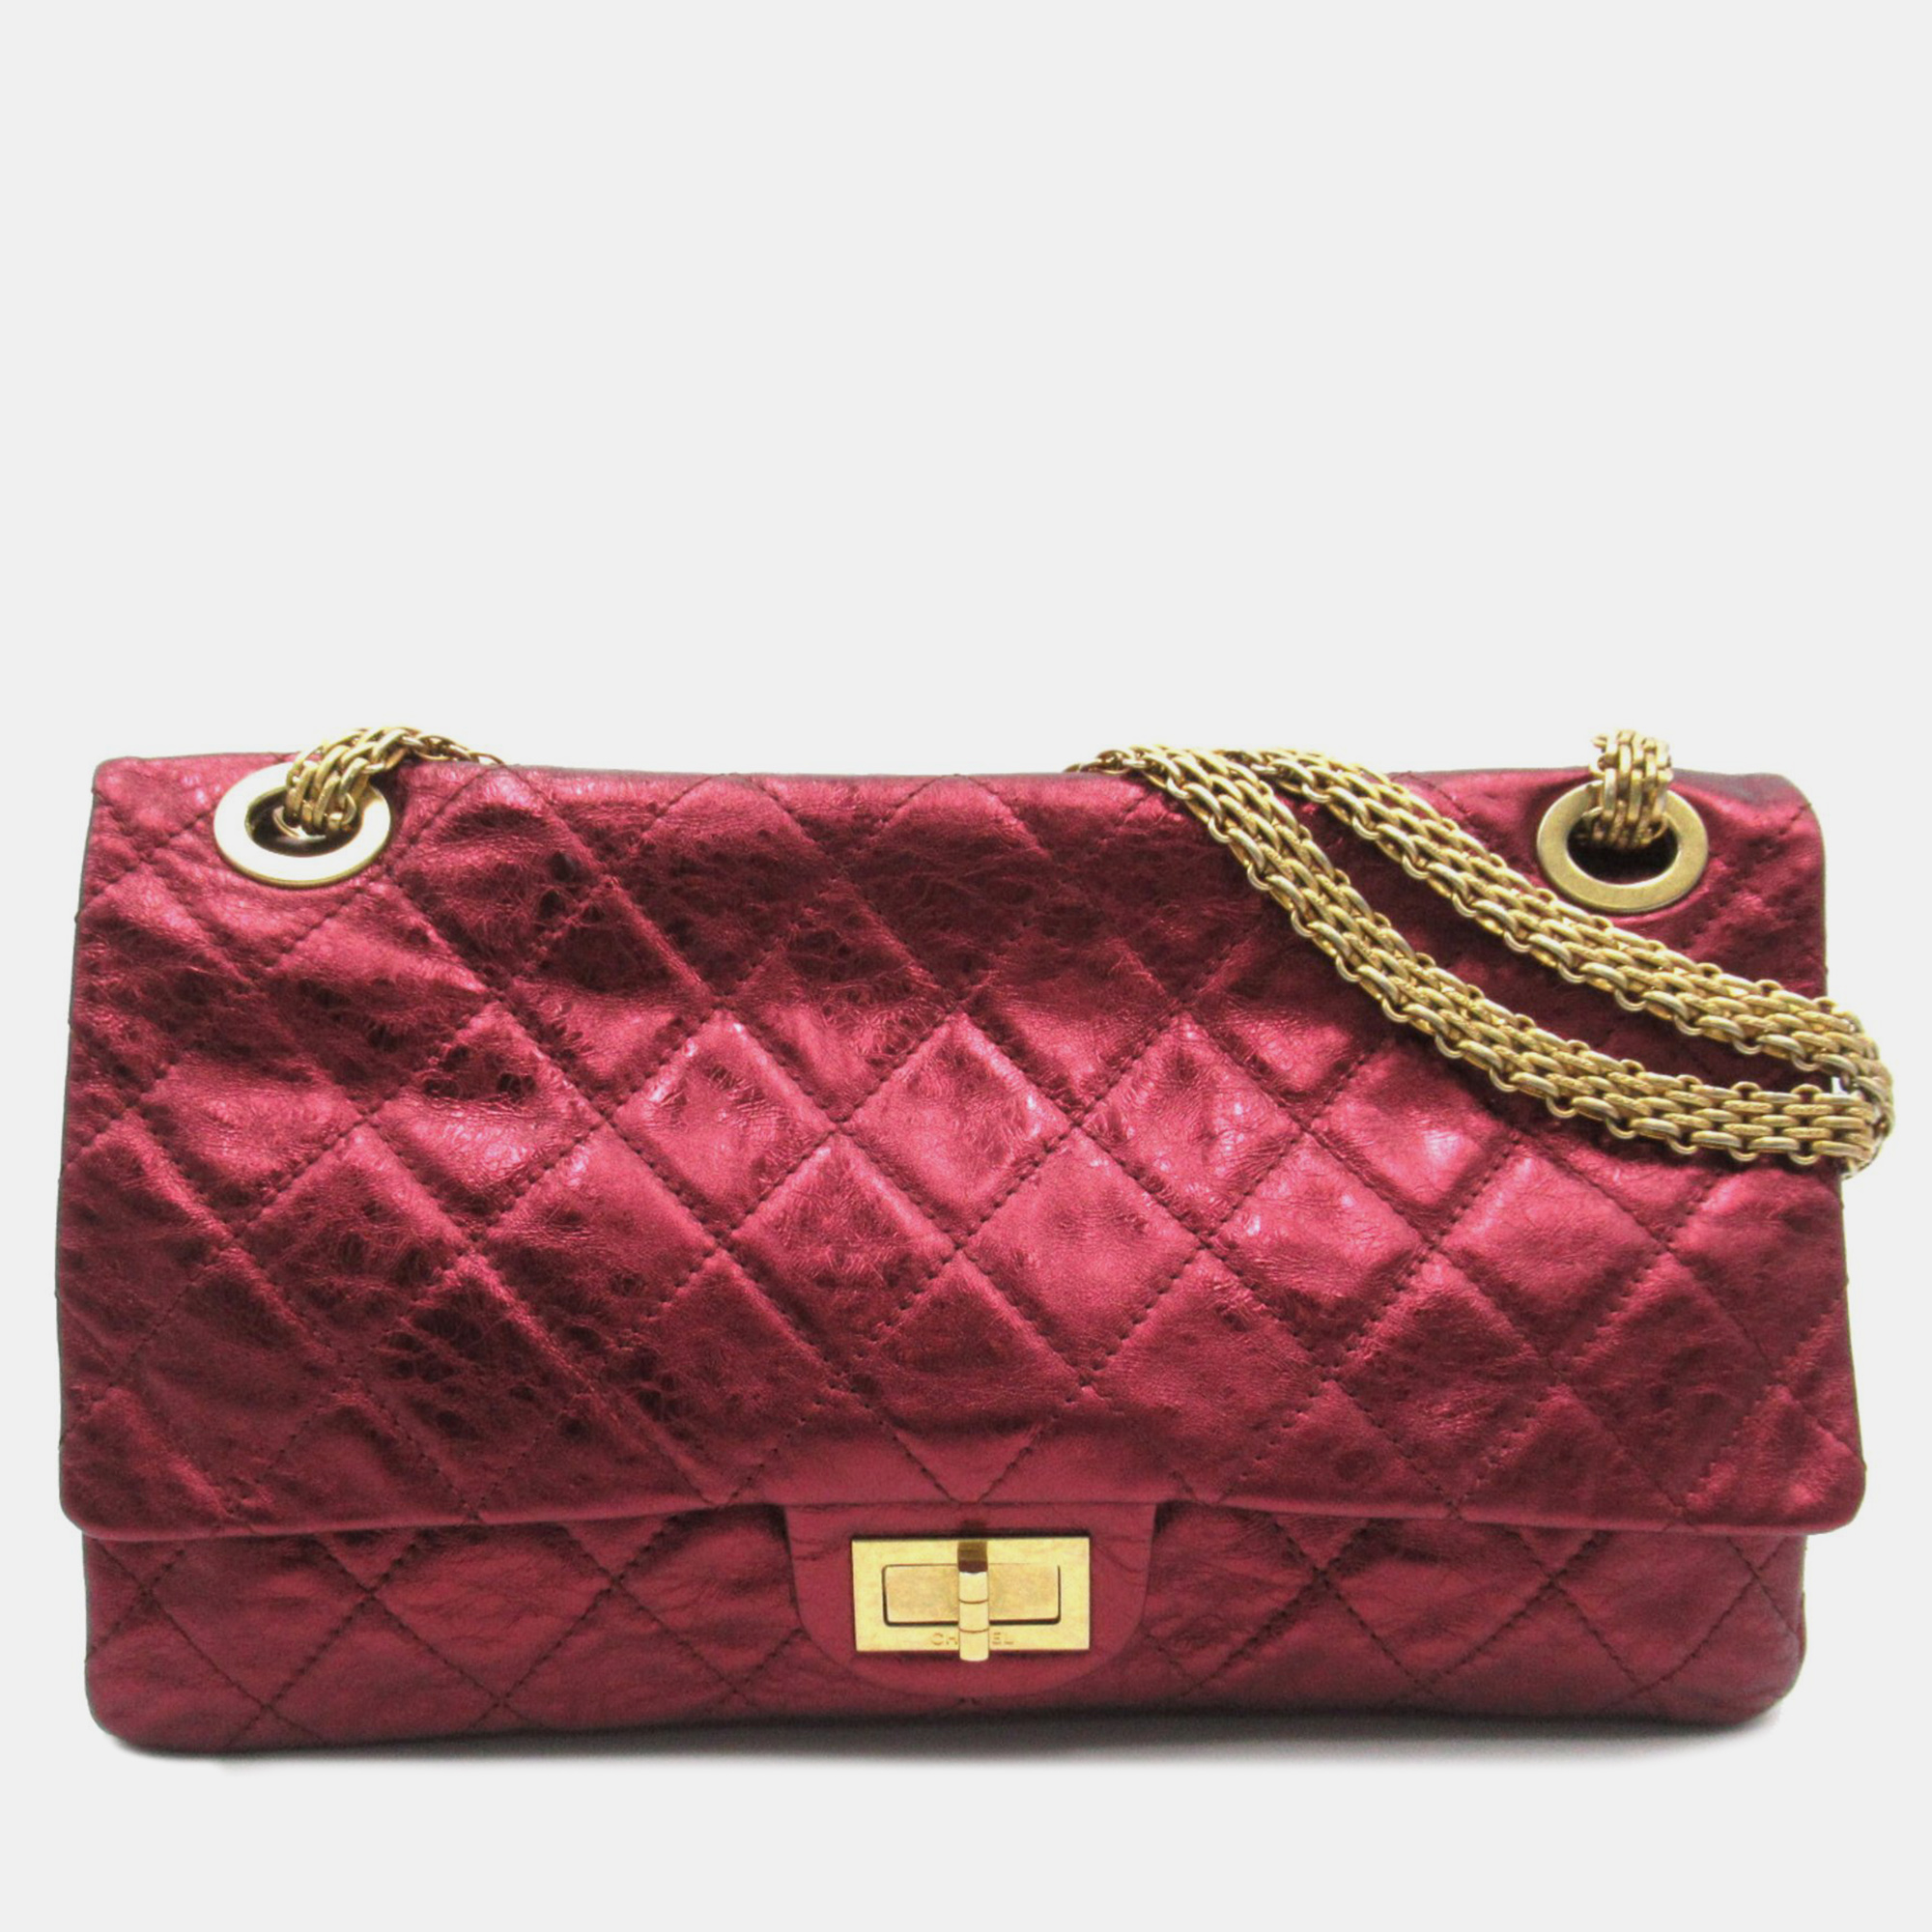 

Chanel Burgundy Metallic Quilted Leather Reissue 2.55 Classic 227 Flap Bag